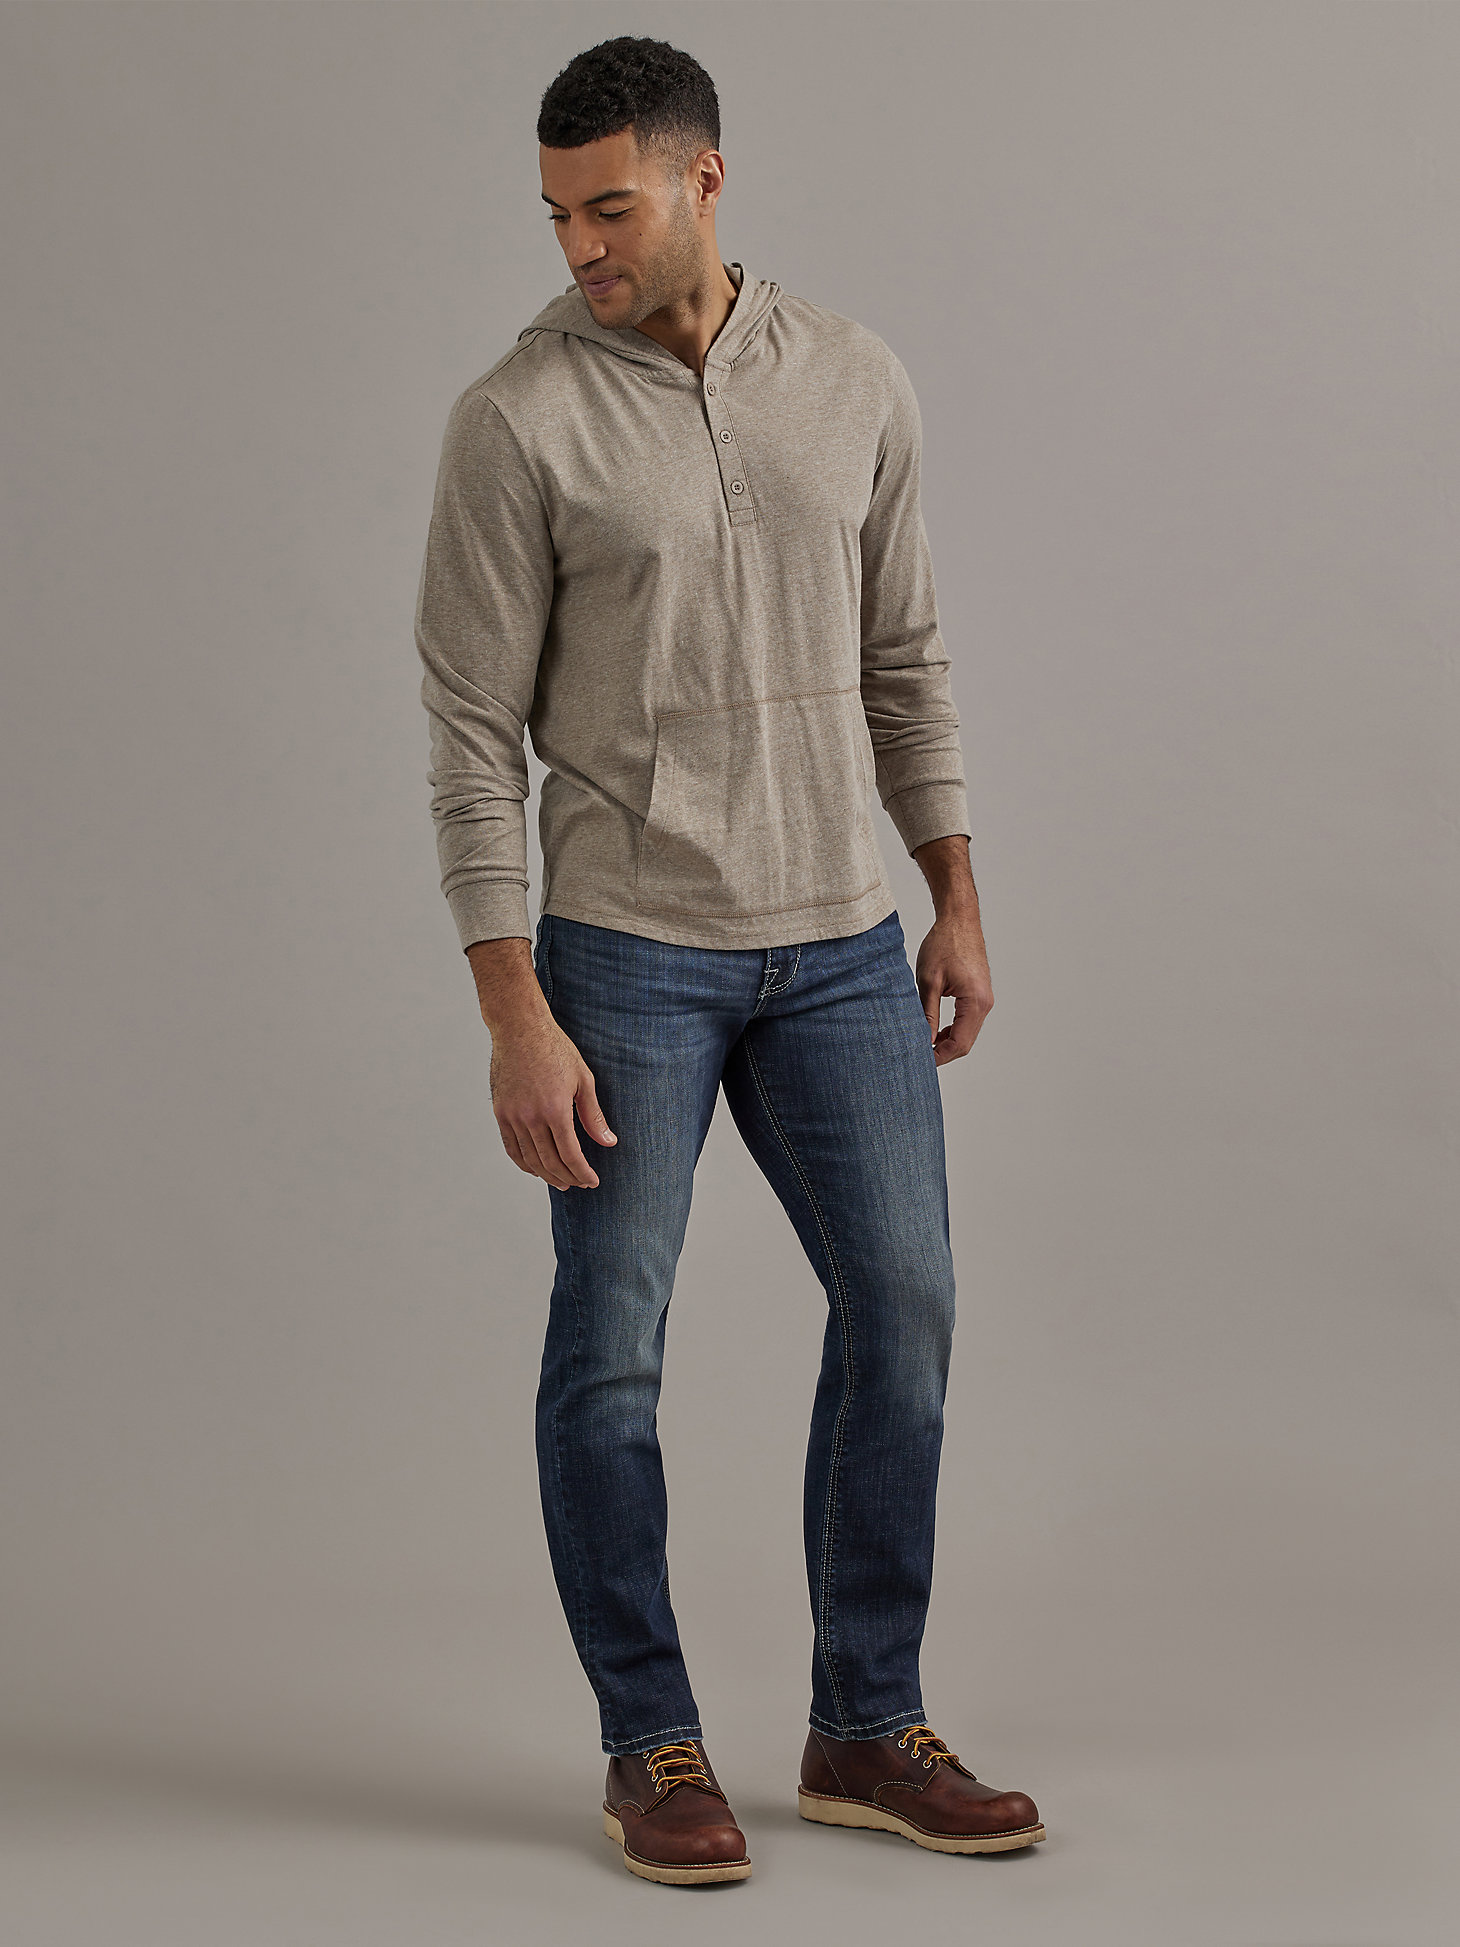 Hooded Henley in Oatmeal main view